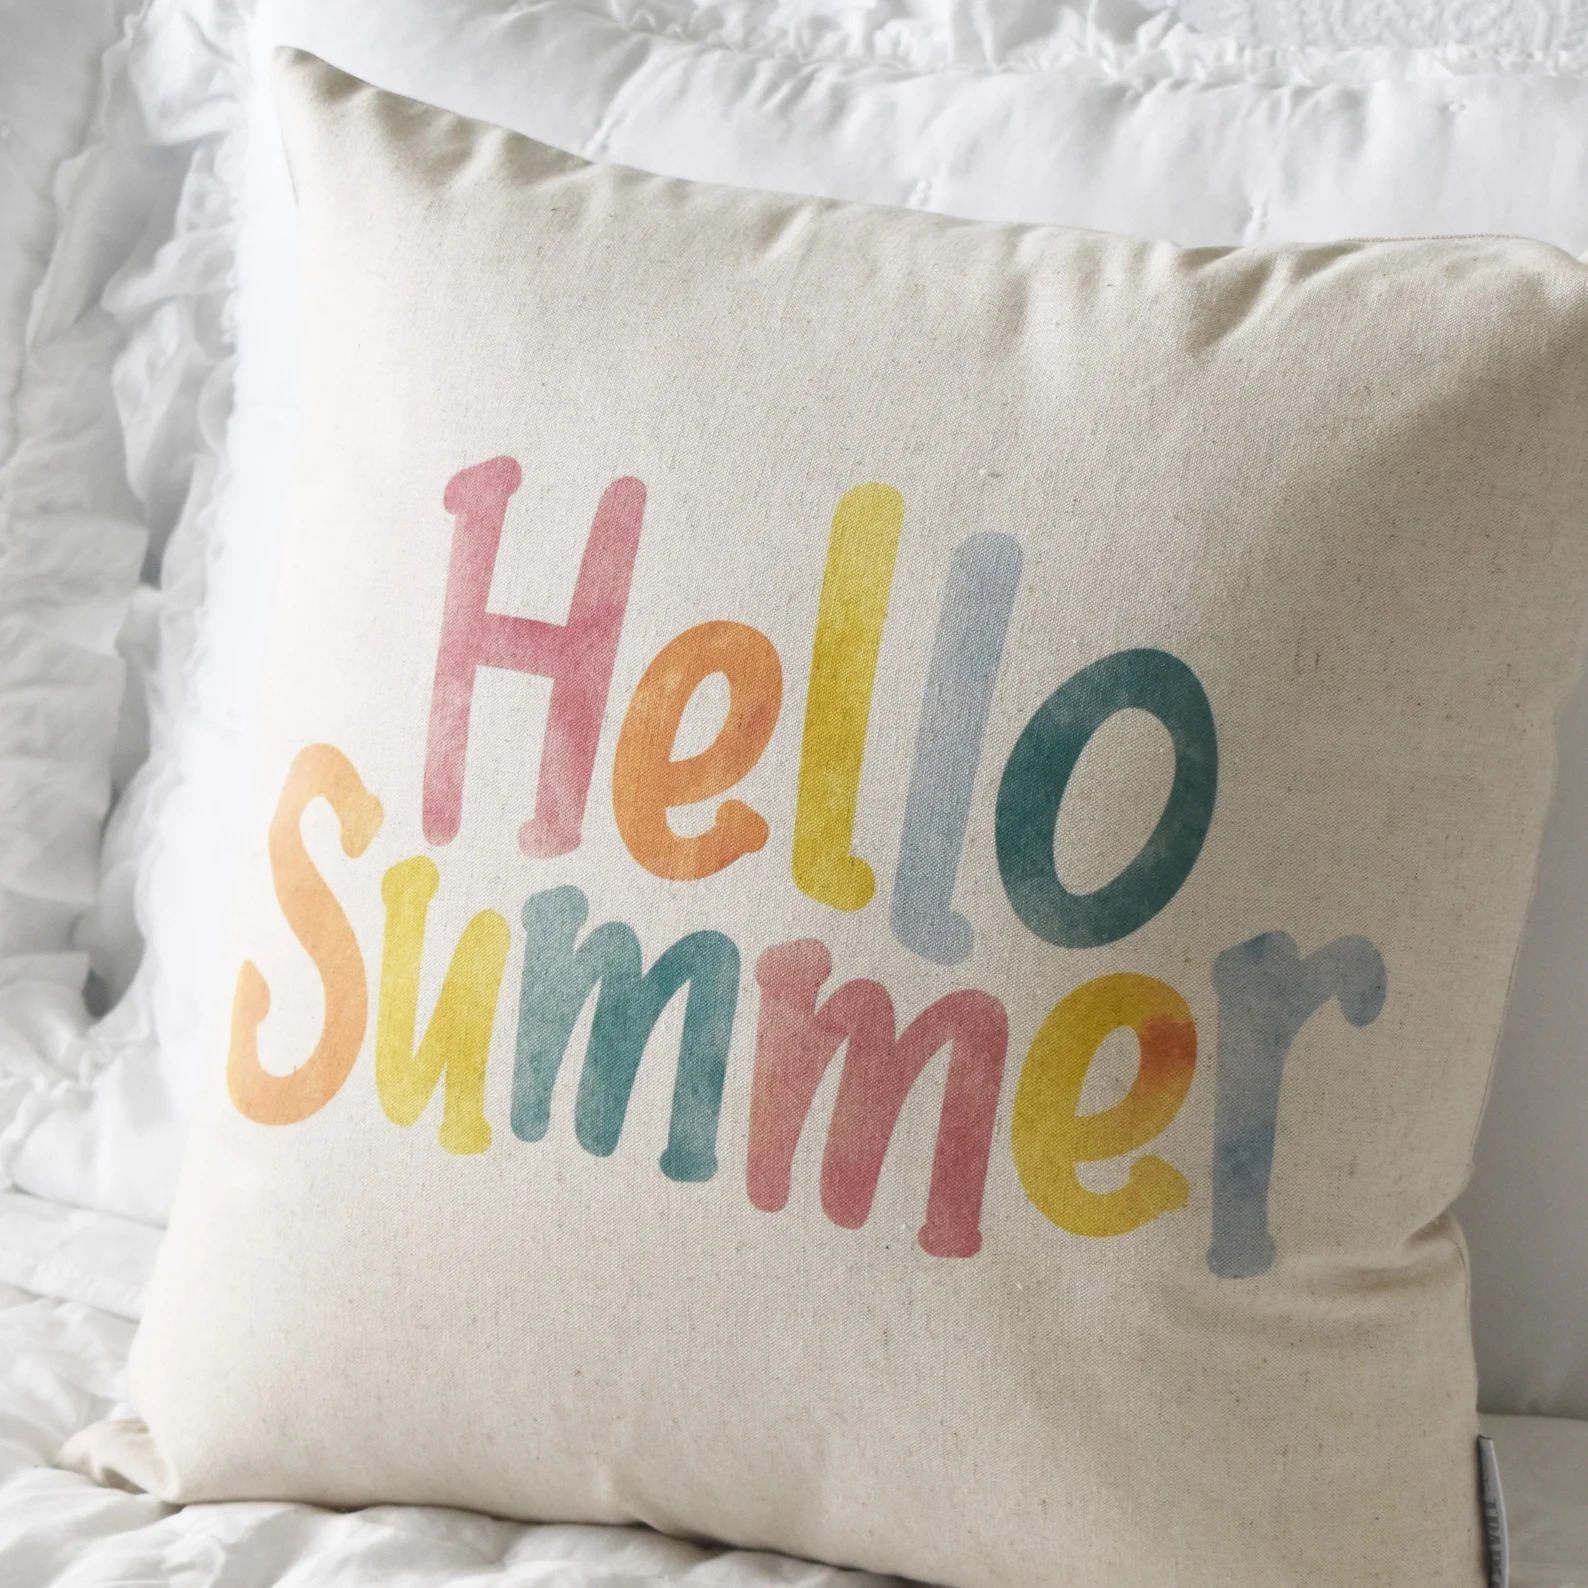 15 Refreshing Summer Pillow Covers To Switch Things Up A Bit